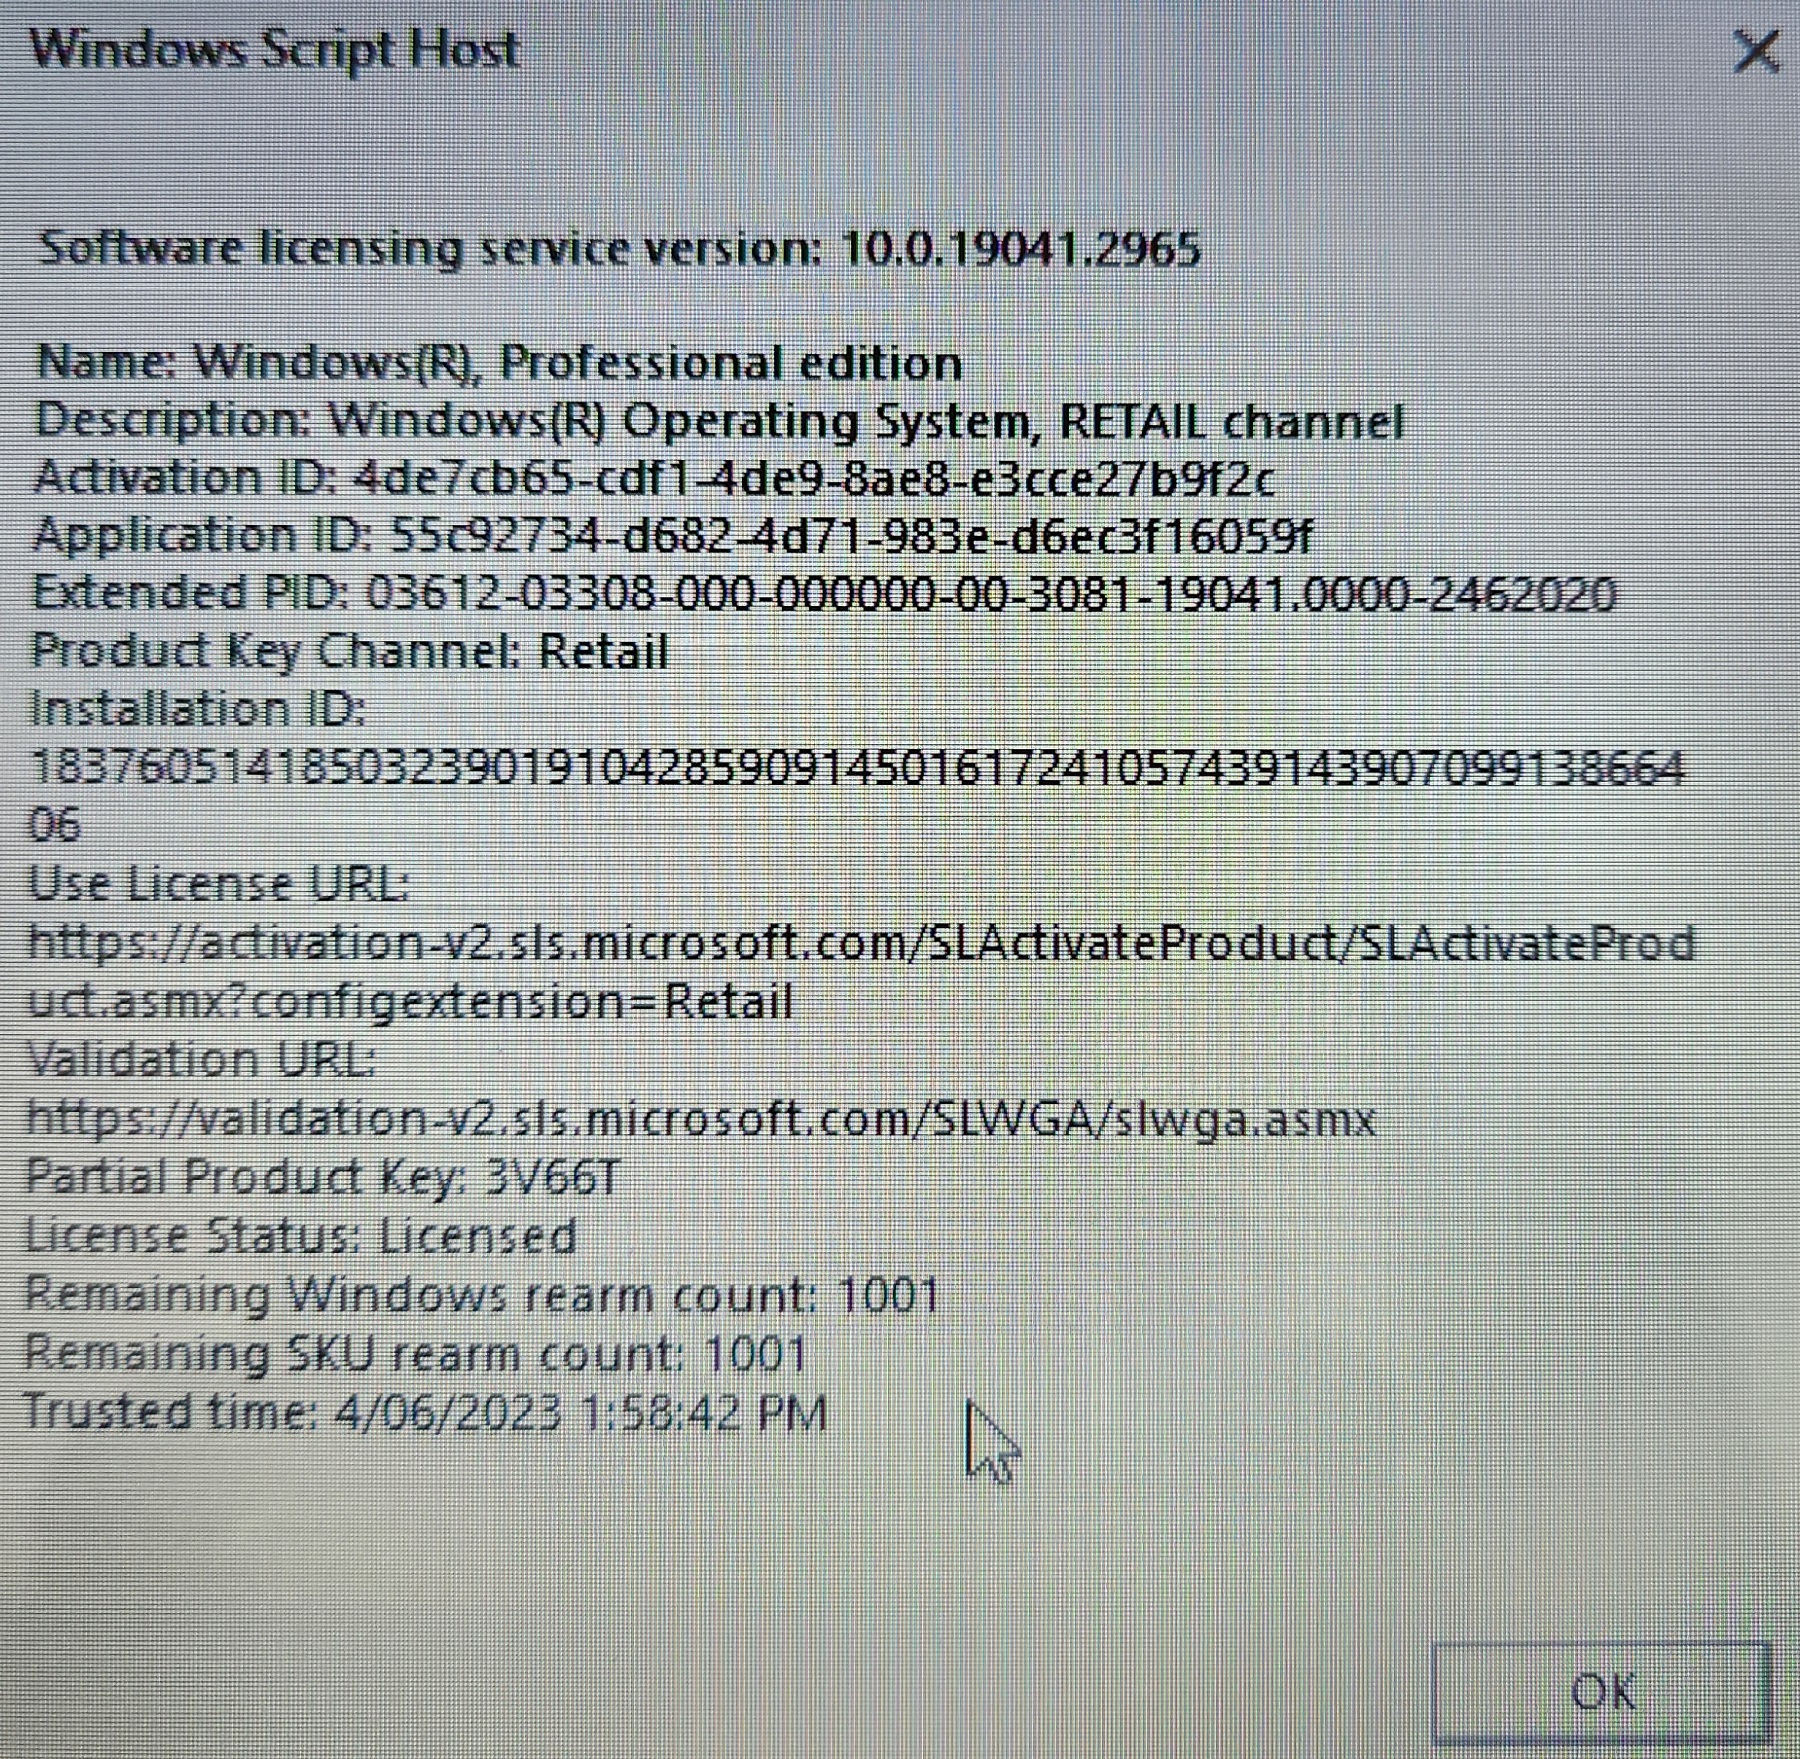 Windows 10 Pro Product Key: Windows 10 Pro Product Key is an outstanding  worki